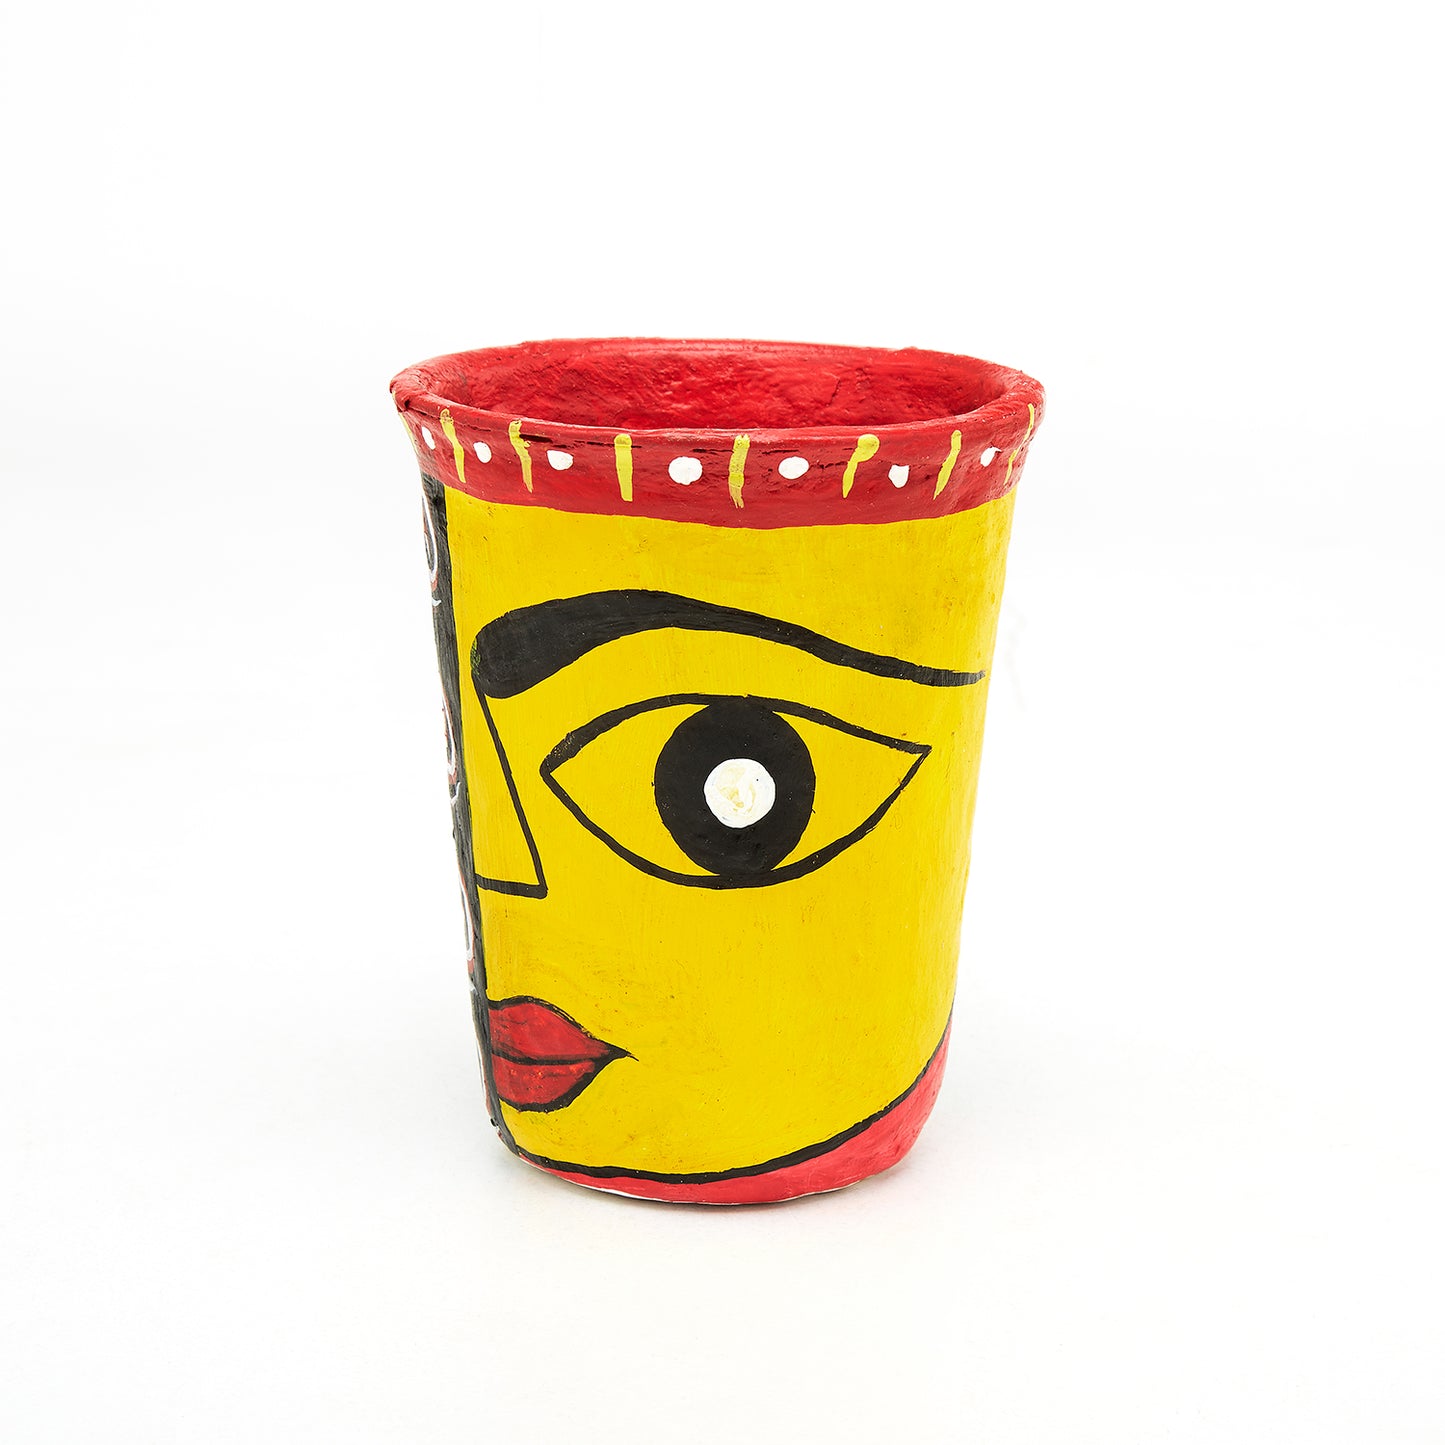 Cherry Red & yellow with Face - Paper Mache Planer